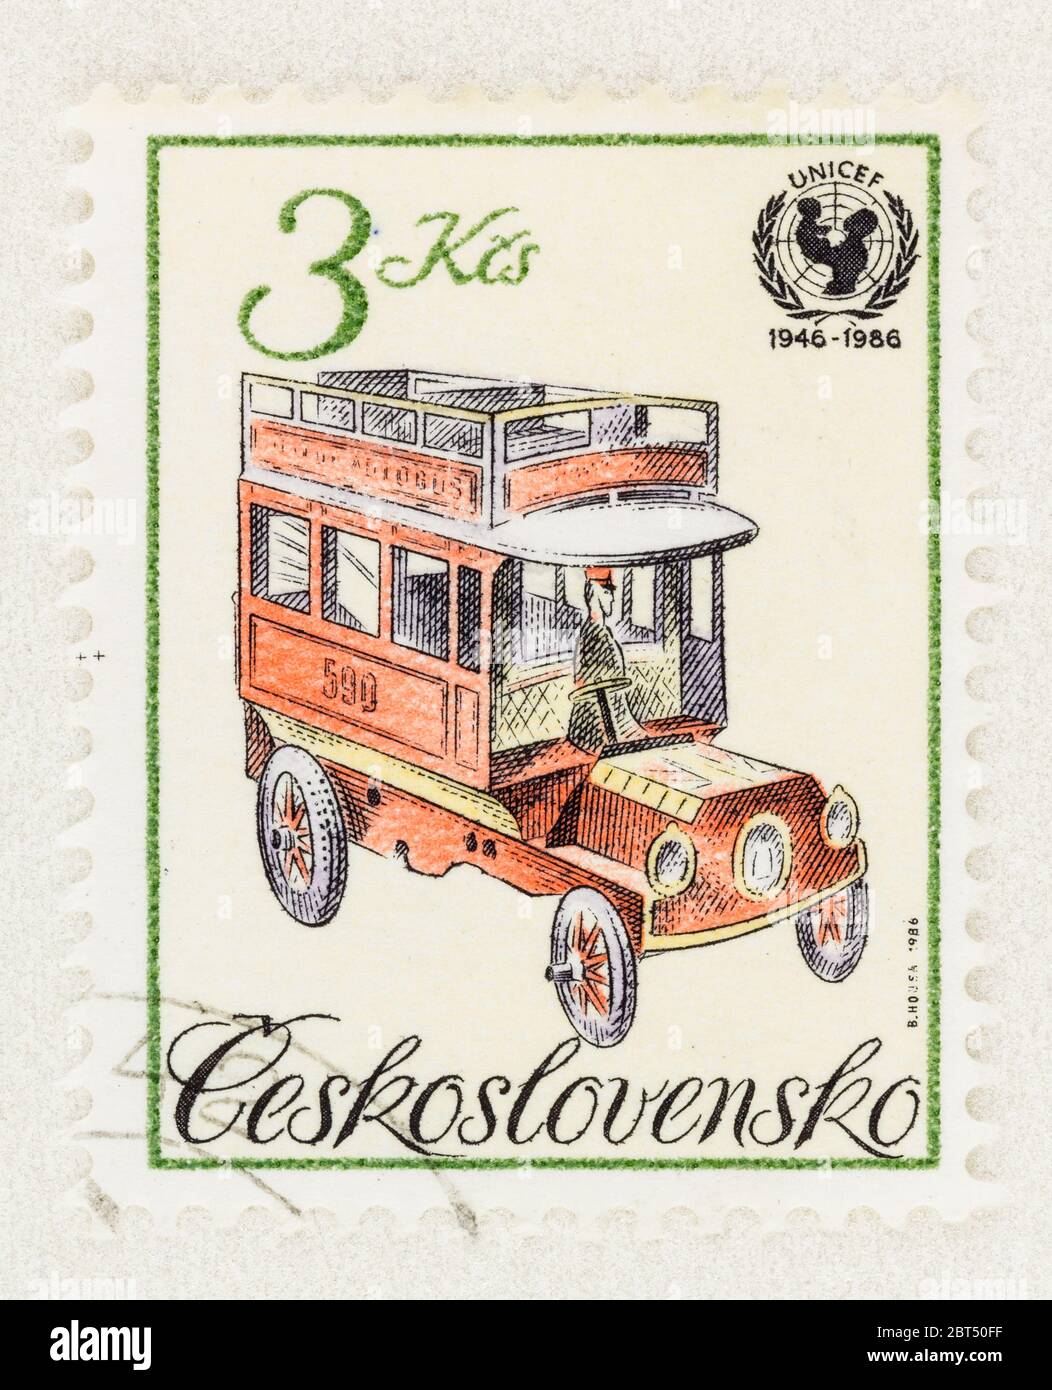 SEATTLE WASHINGTON - May 2, 2020:  Toy Omnibus on 1986 Czech stamp,  commemorating the 40th anniversary of UNICEF. Scott # 2616 Stock Photo